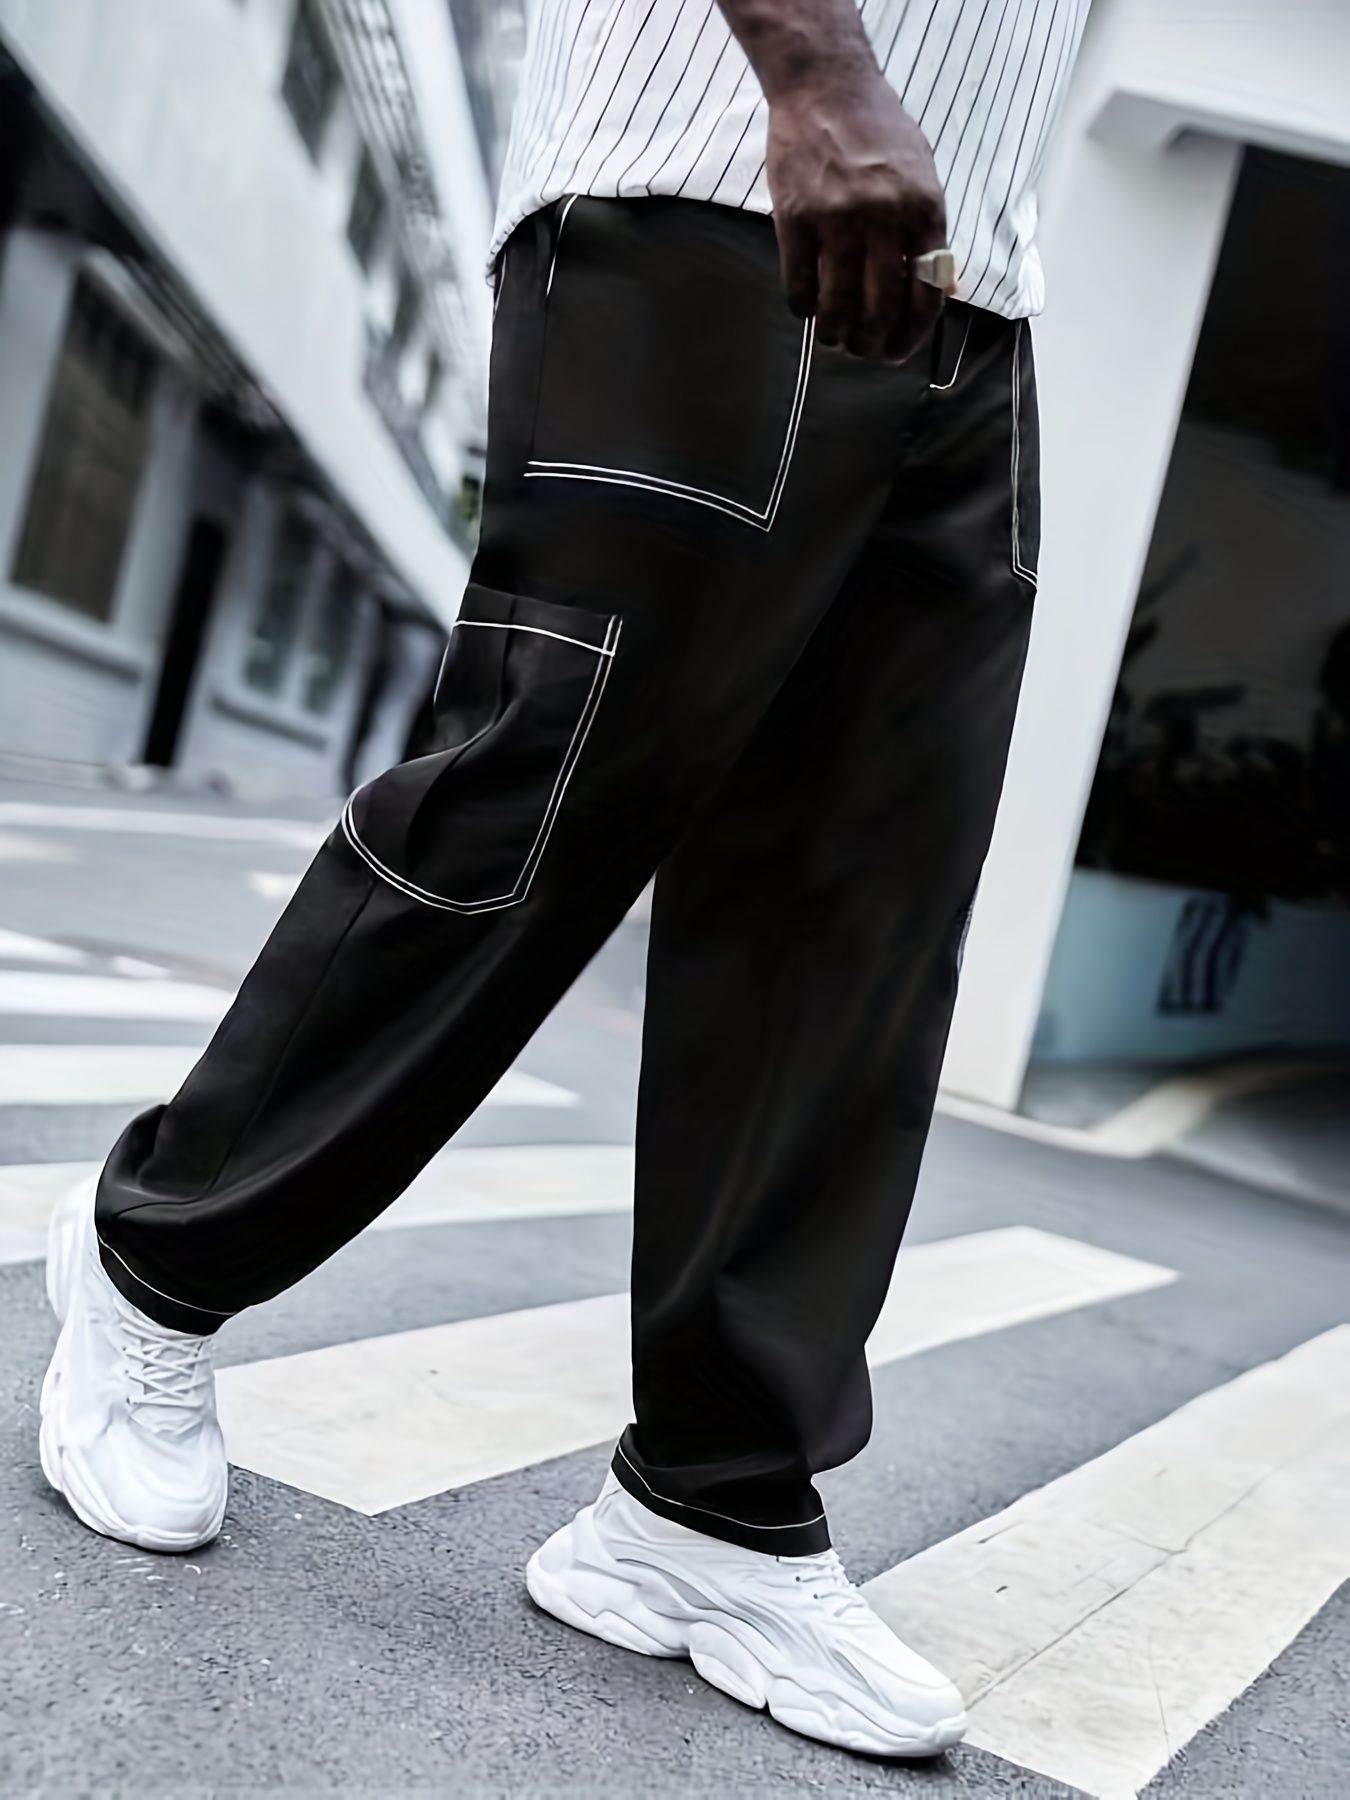 Mens Cotton Cargo Pockets Pants Loose Casual Trousers Straight Leg Plus Size